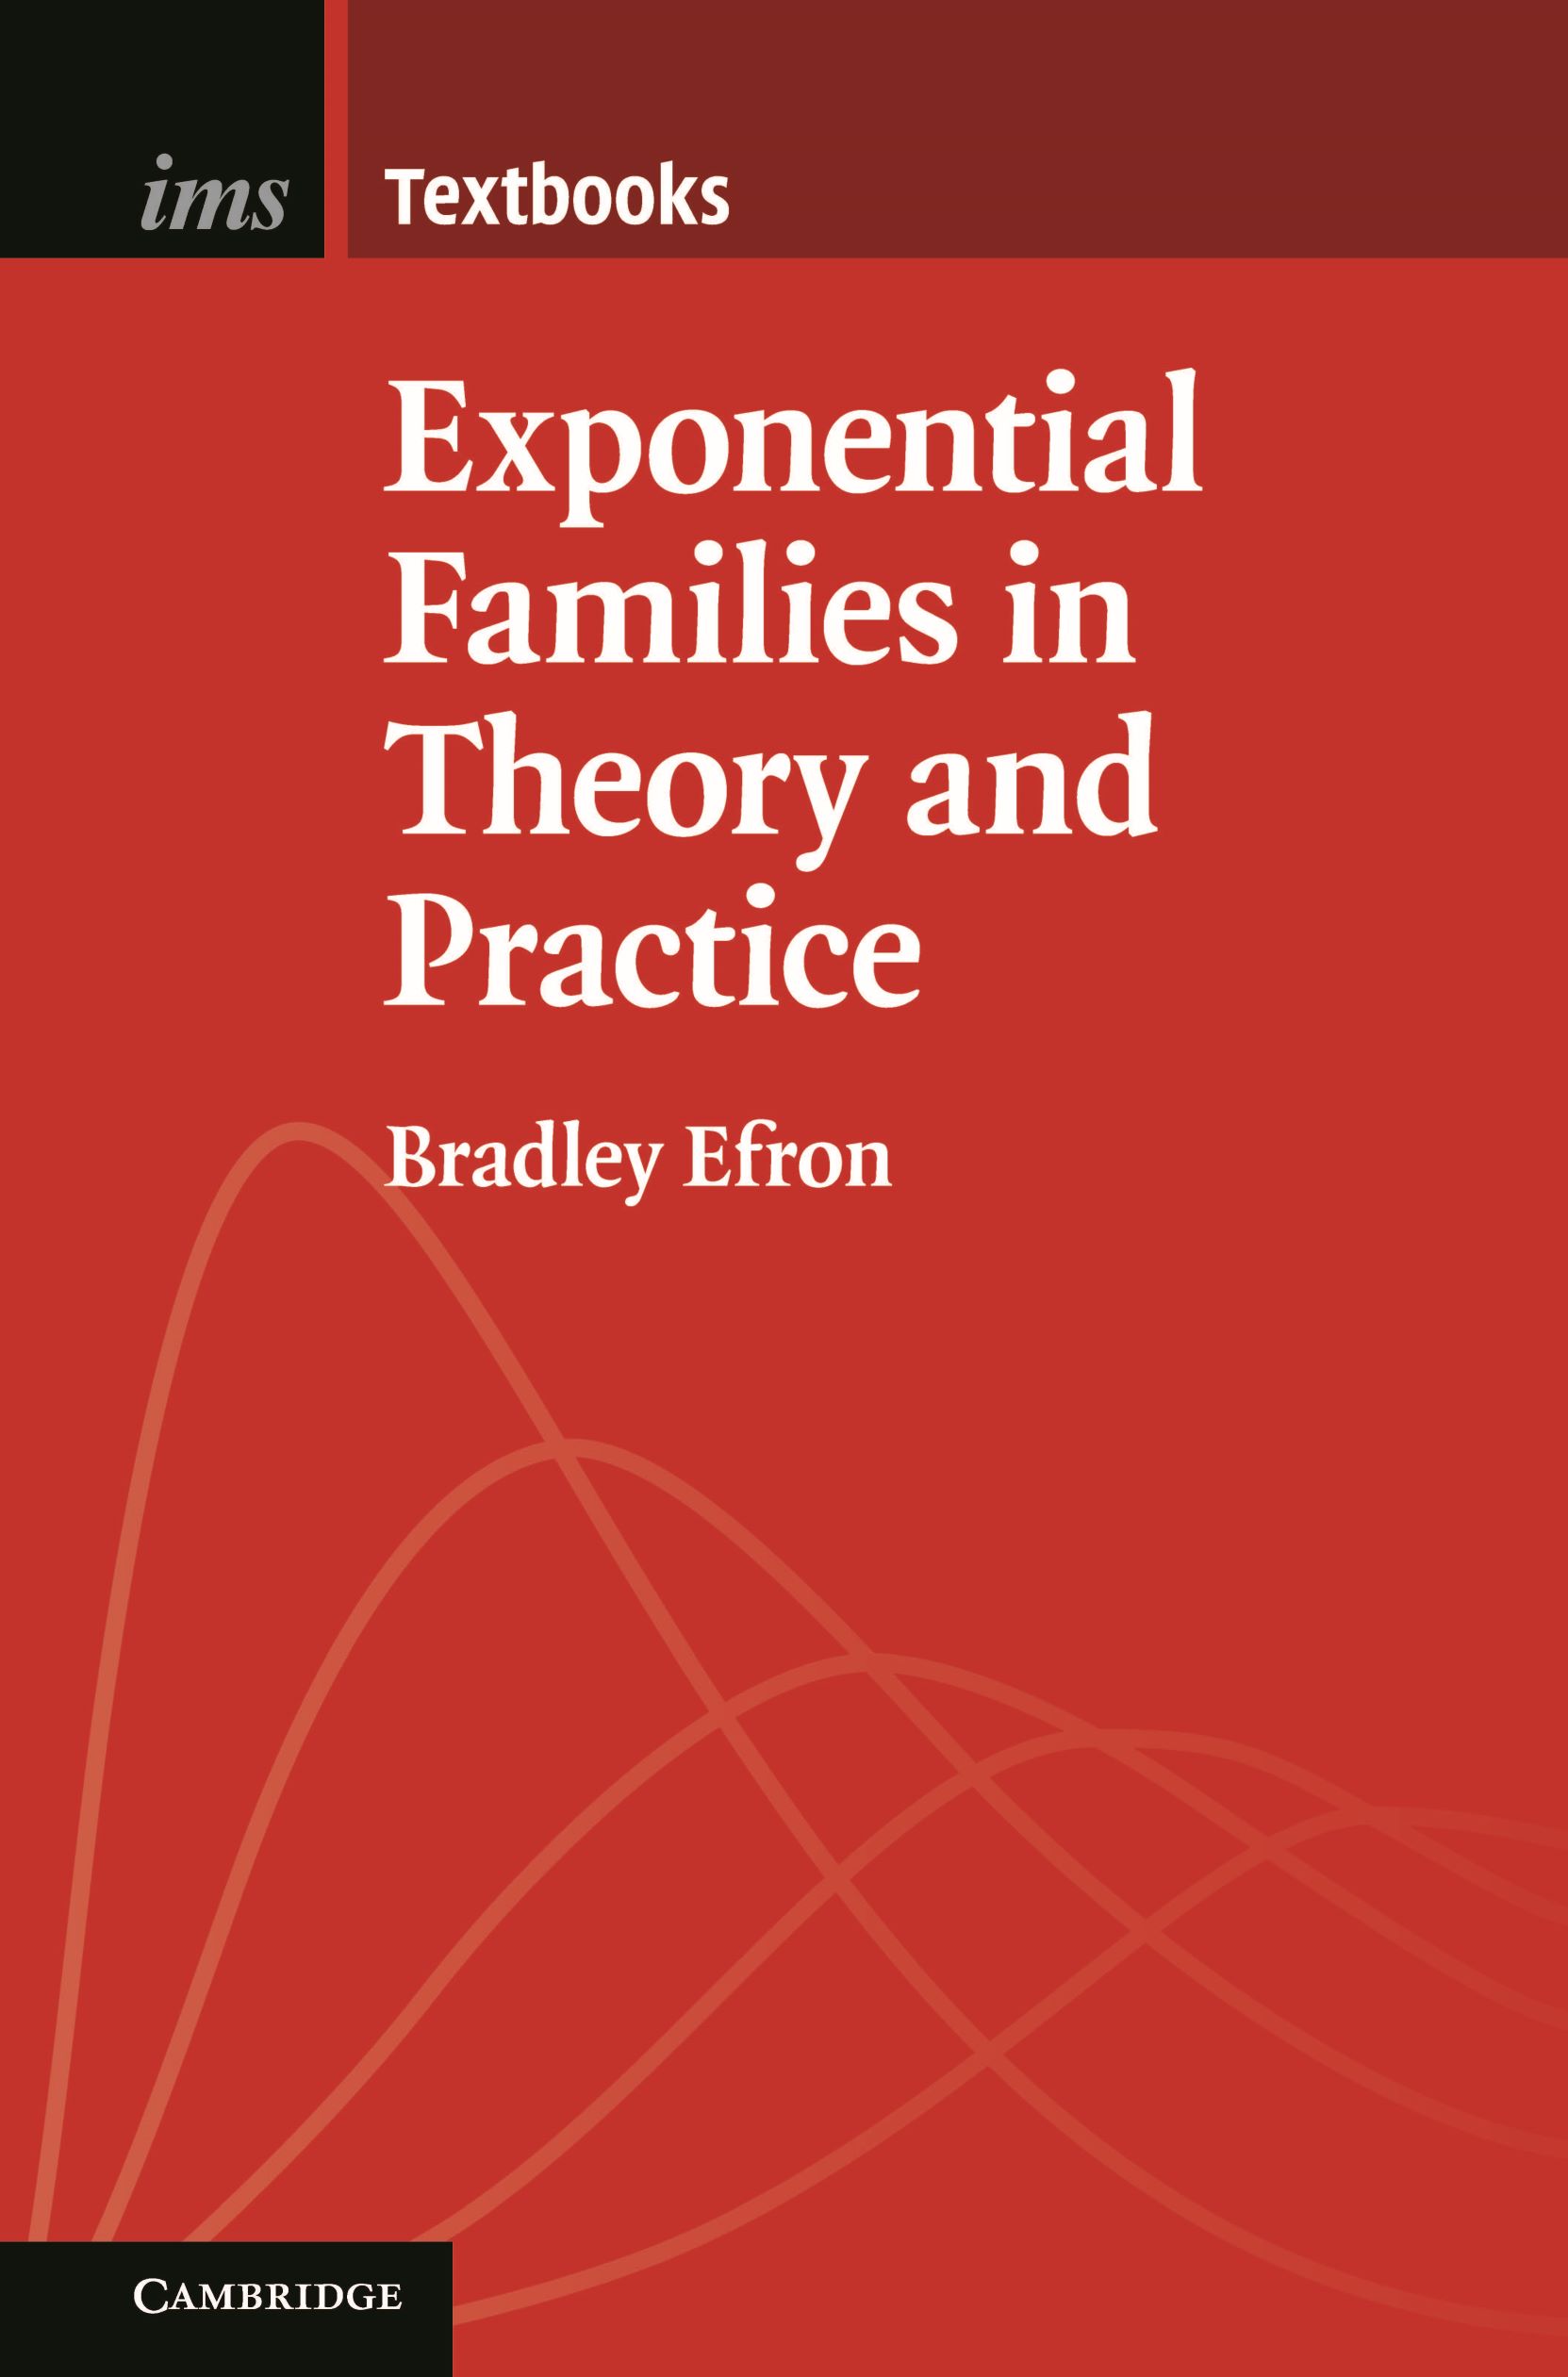 cover image for Brad Efron's new book